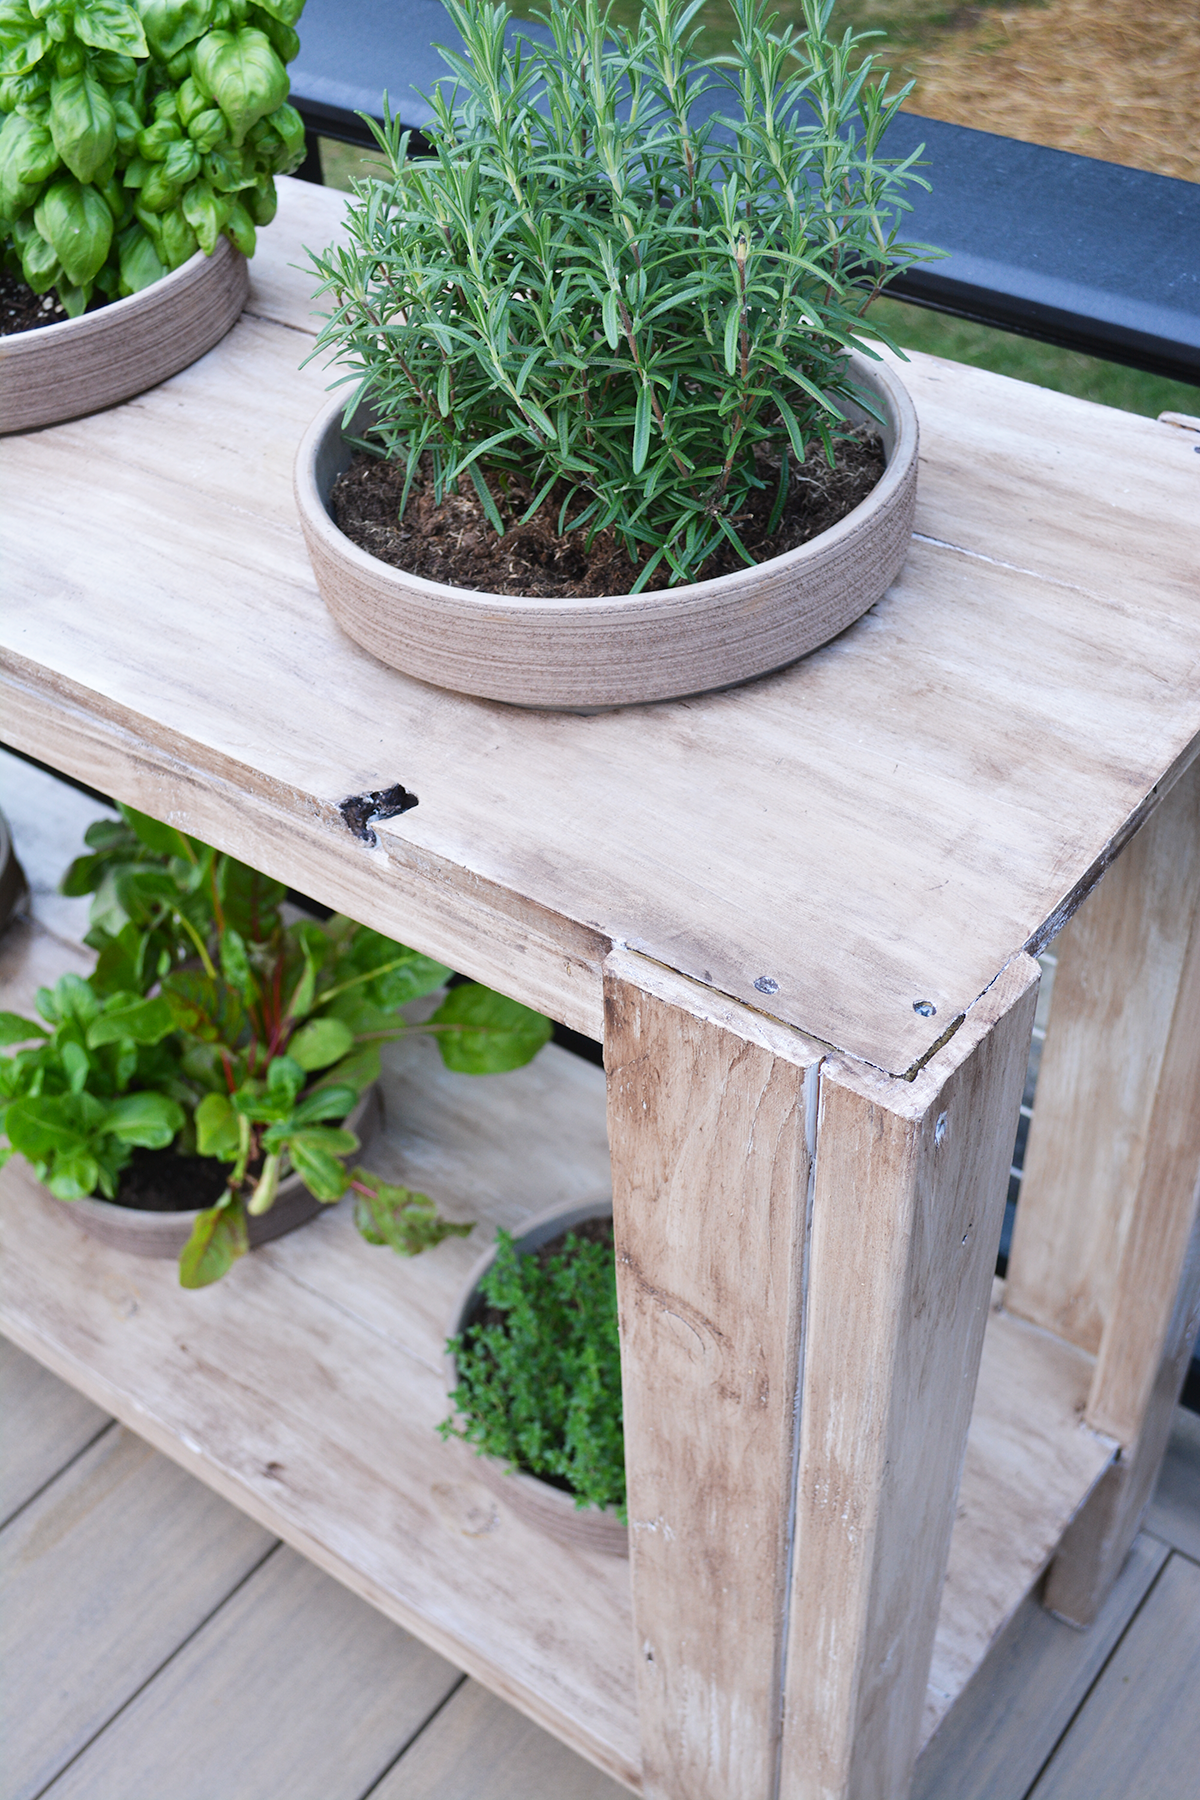 Building an Herb Table